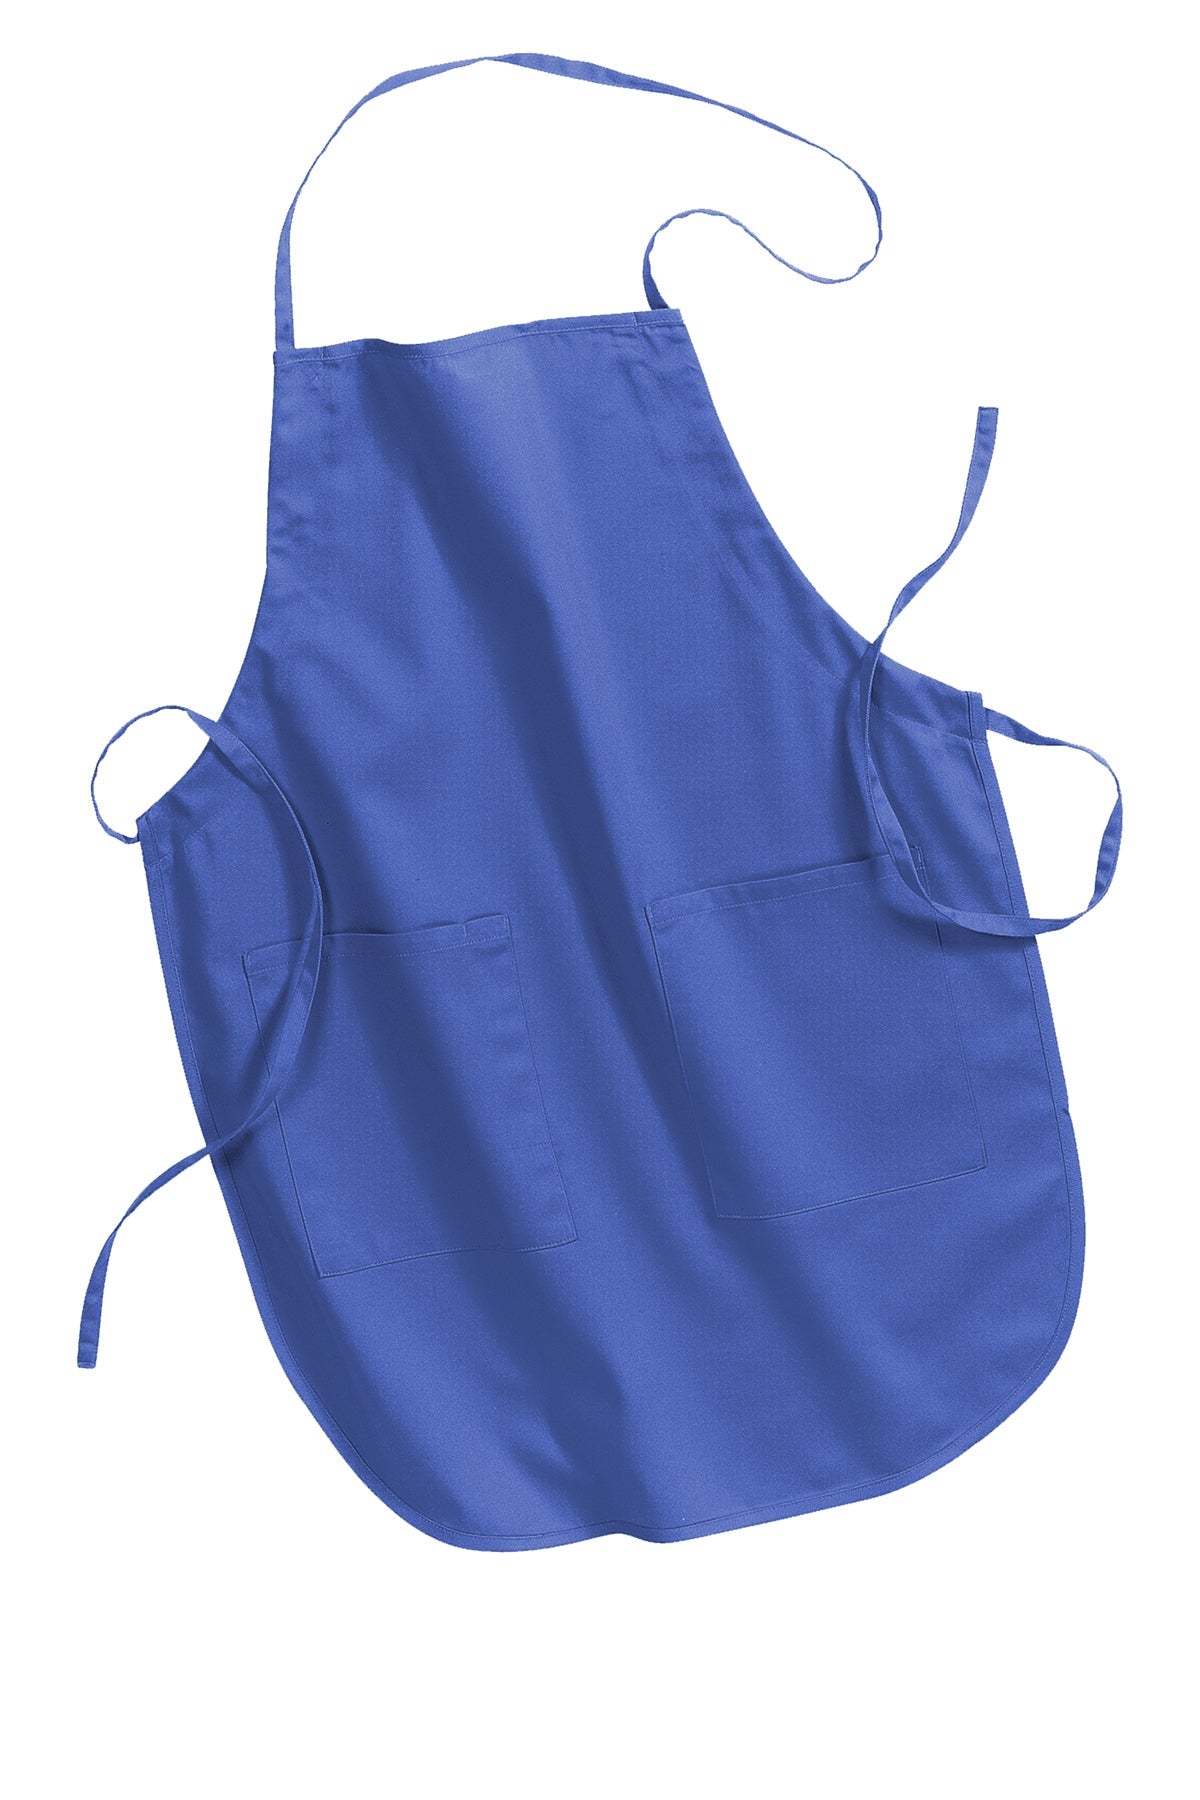 Port Authority Full-Length Branded Aprons, Faded Blue